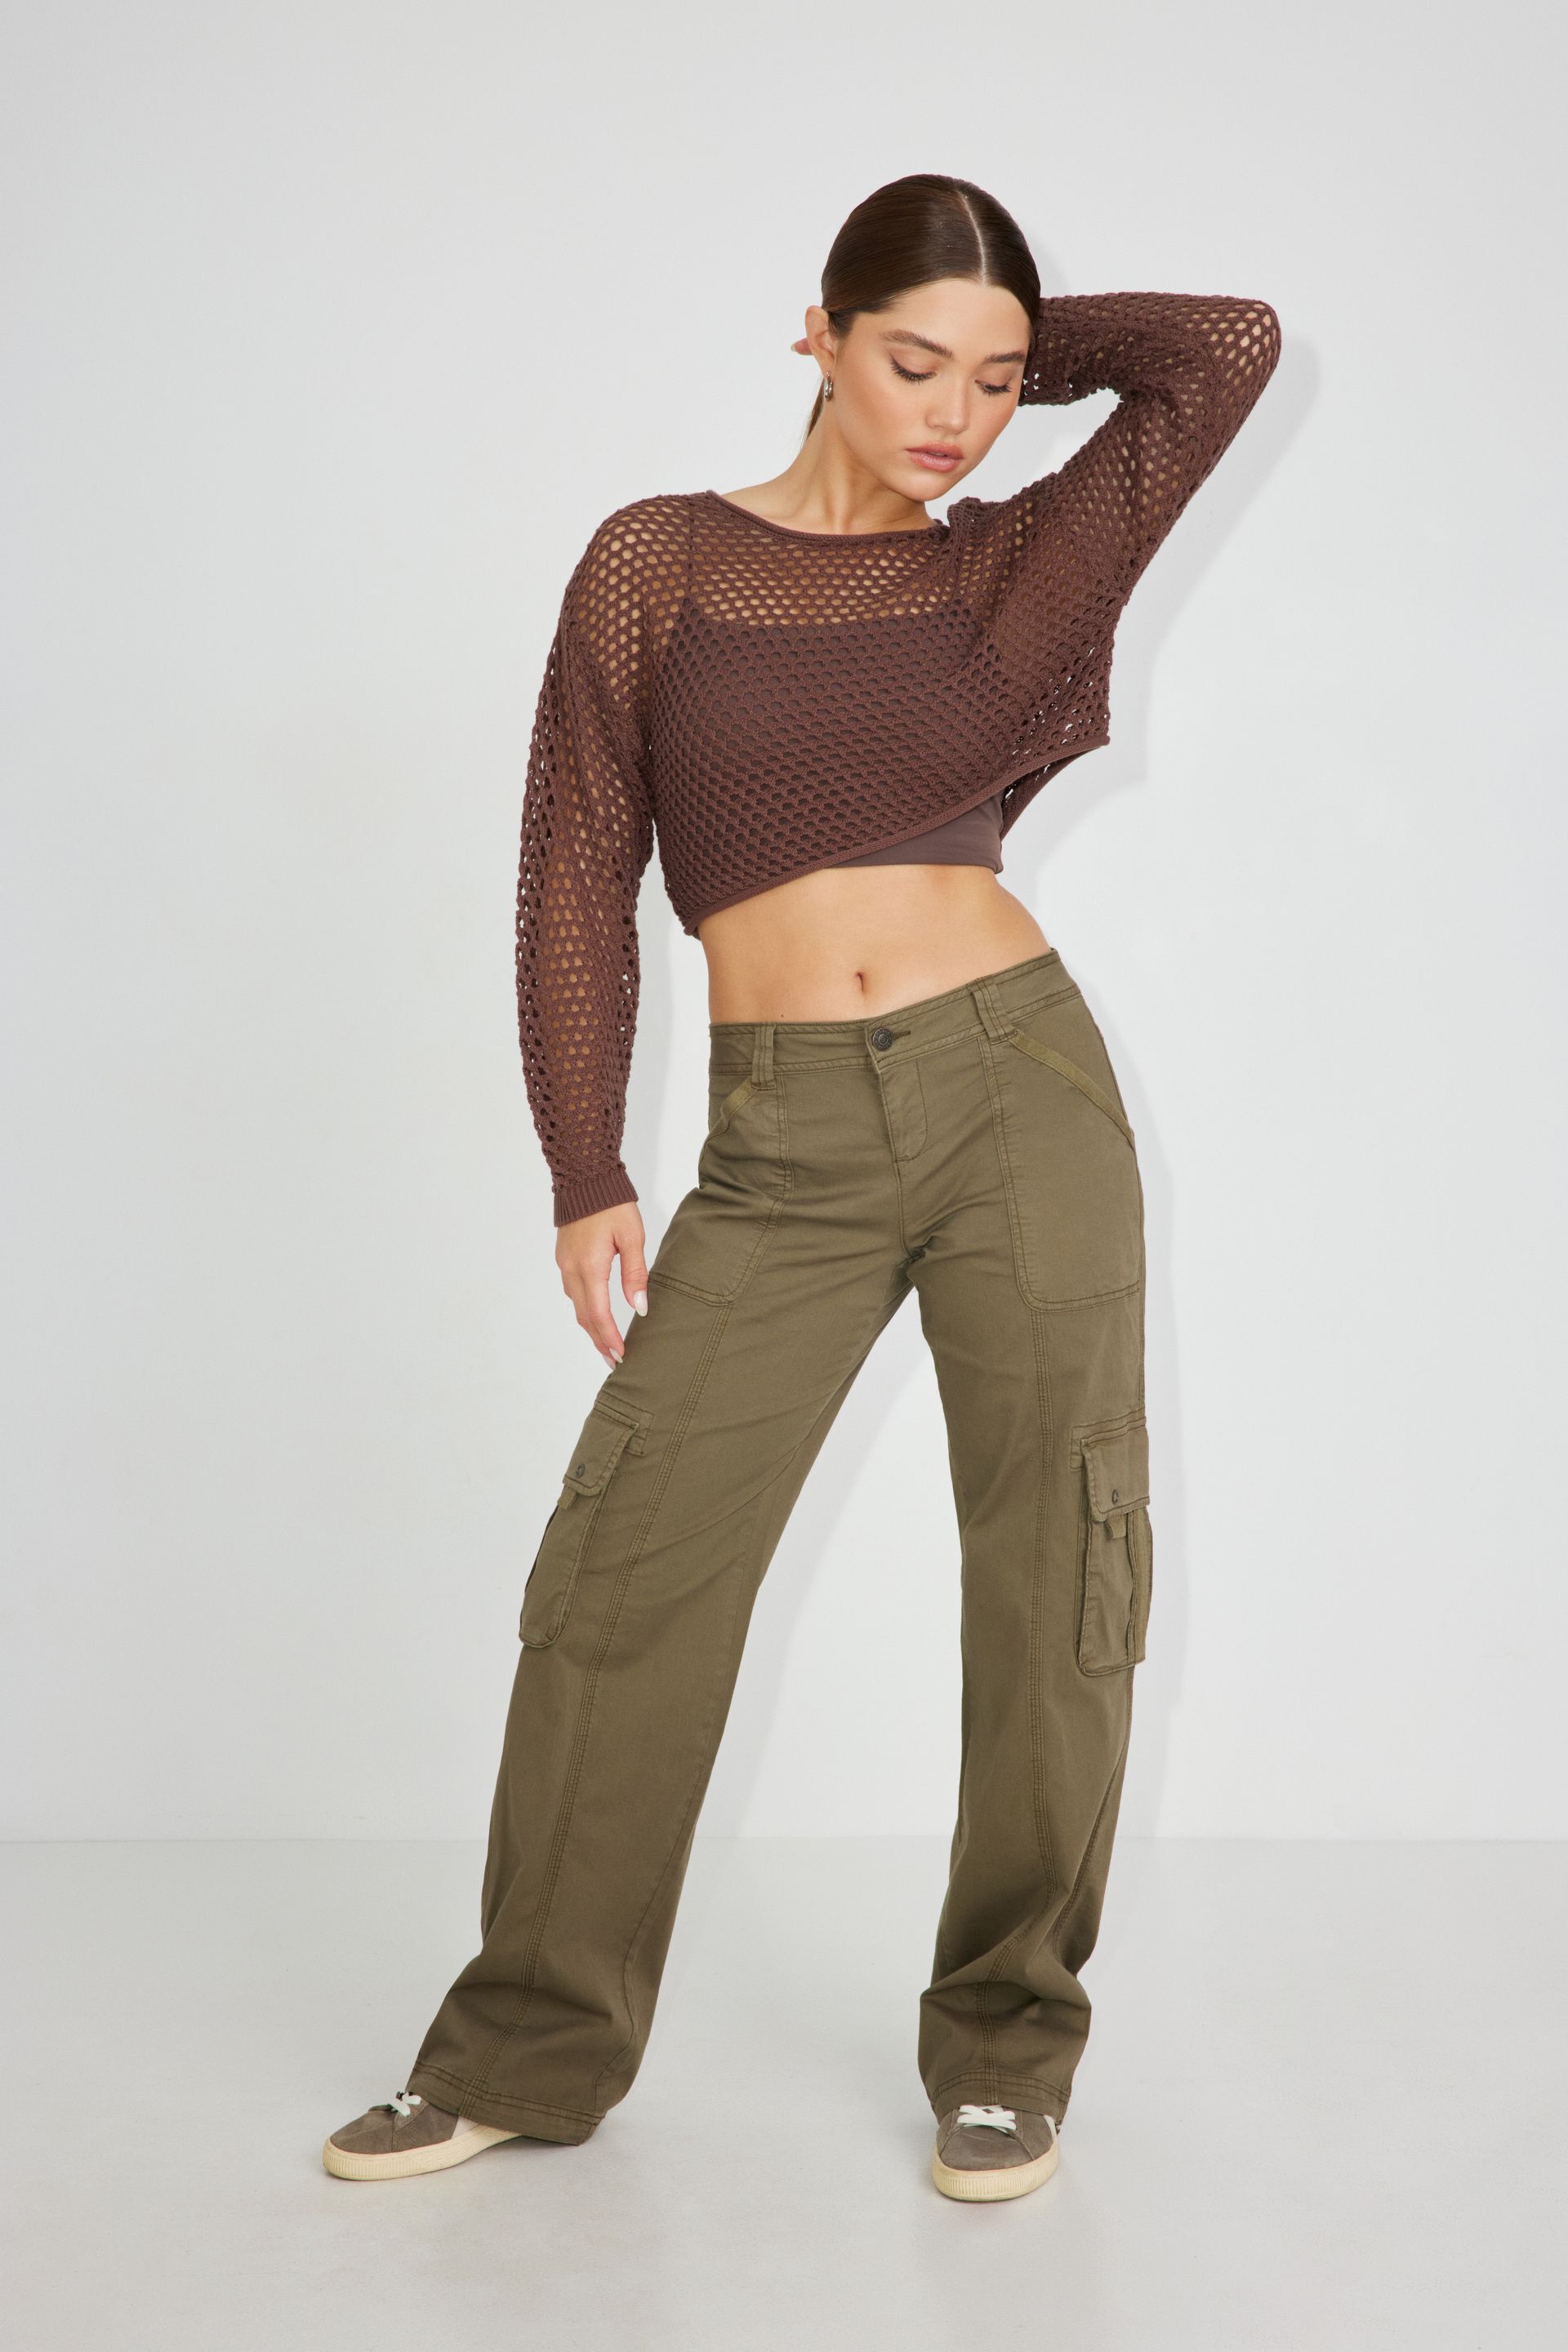 Pobblebonk - Long-Sleeve Plain Cropped T-Shirt / Low Rise Loose Fit Cargo  Pants | YesStyle